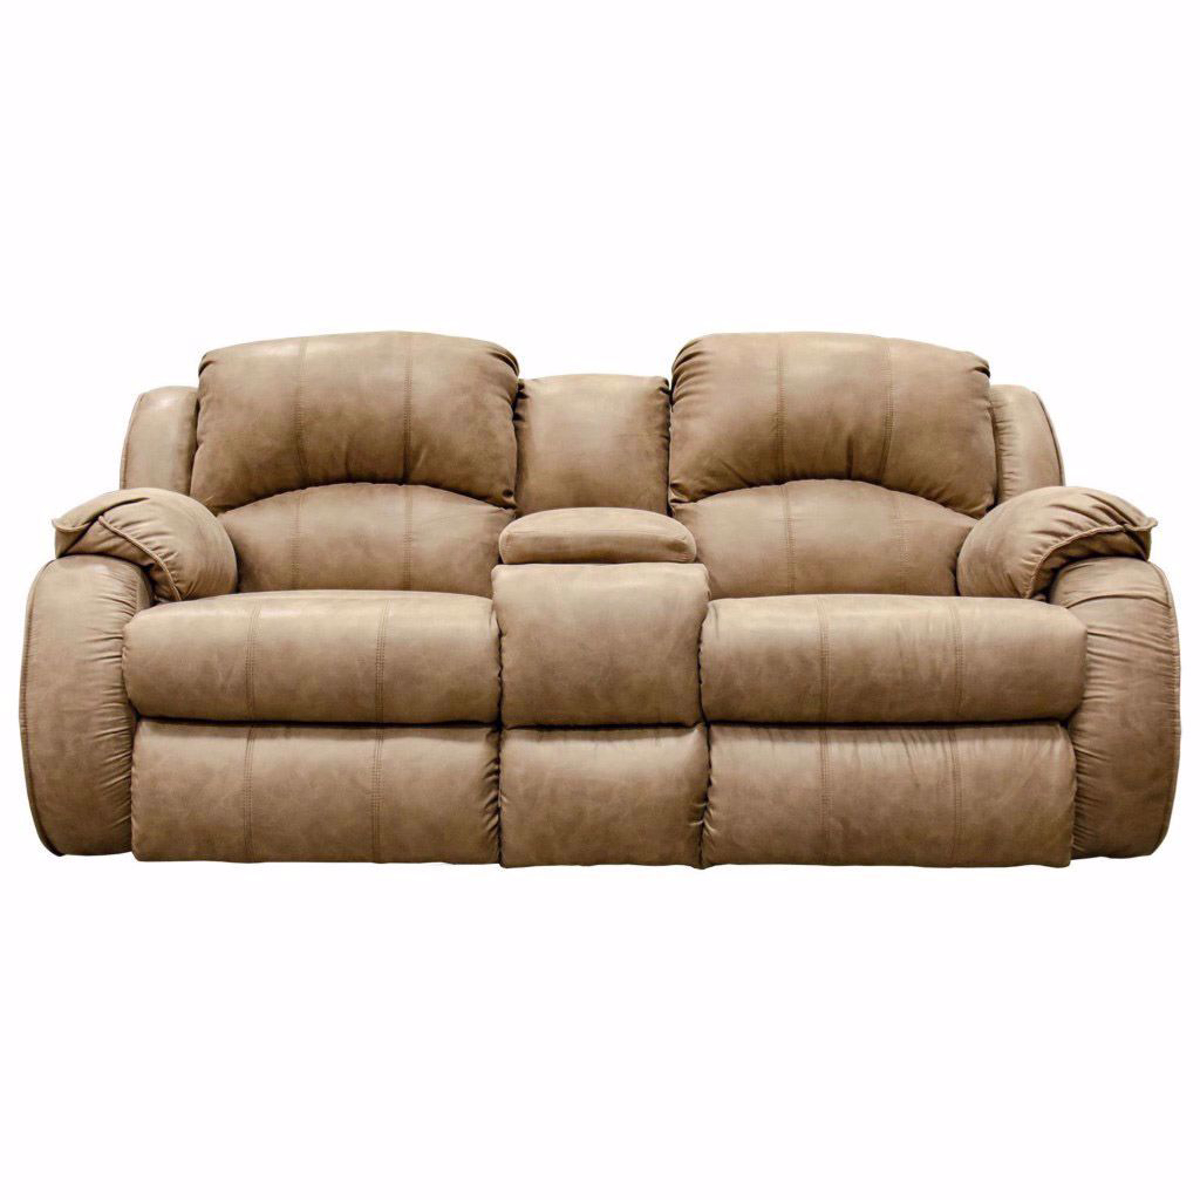 Picture of Bradington Loveseat with Console in Camel